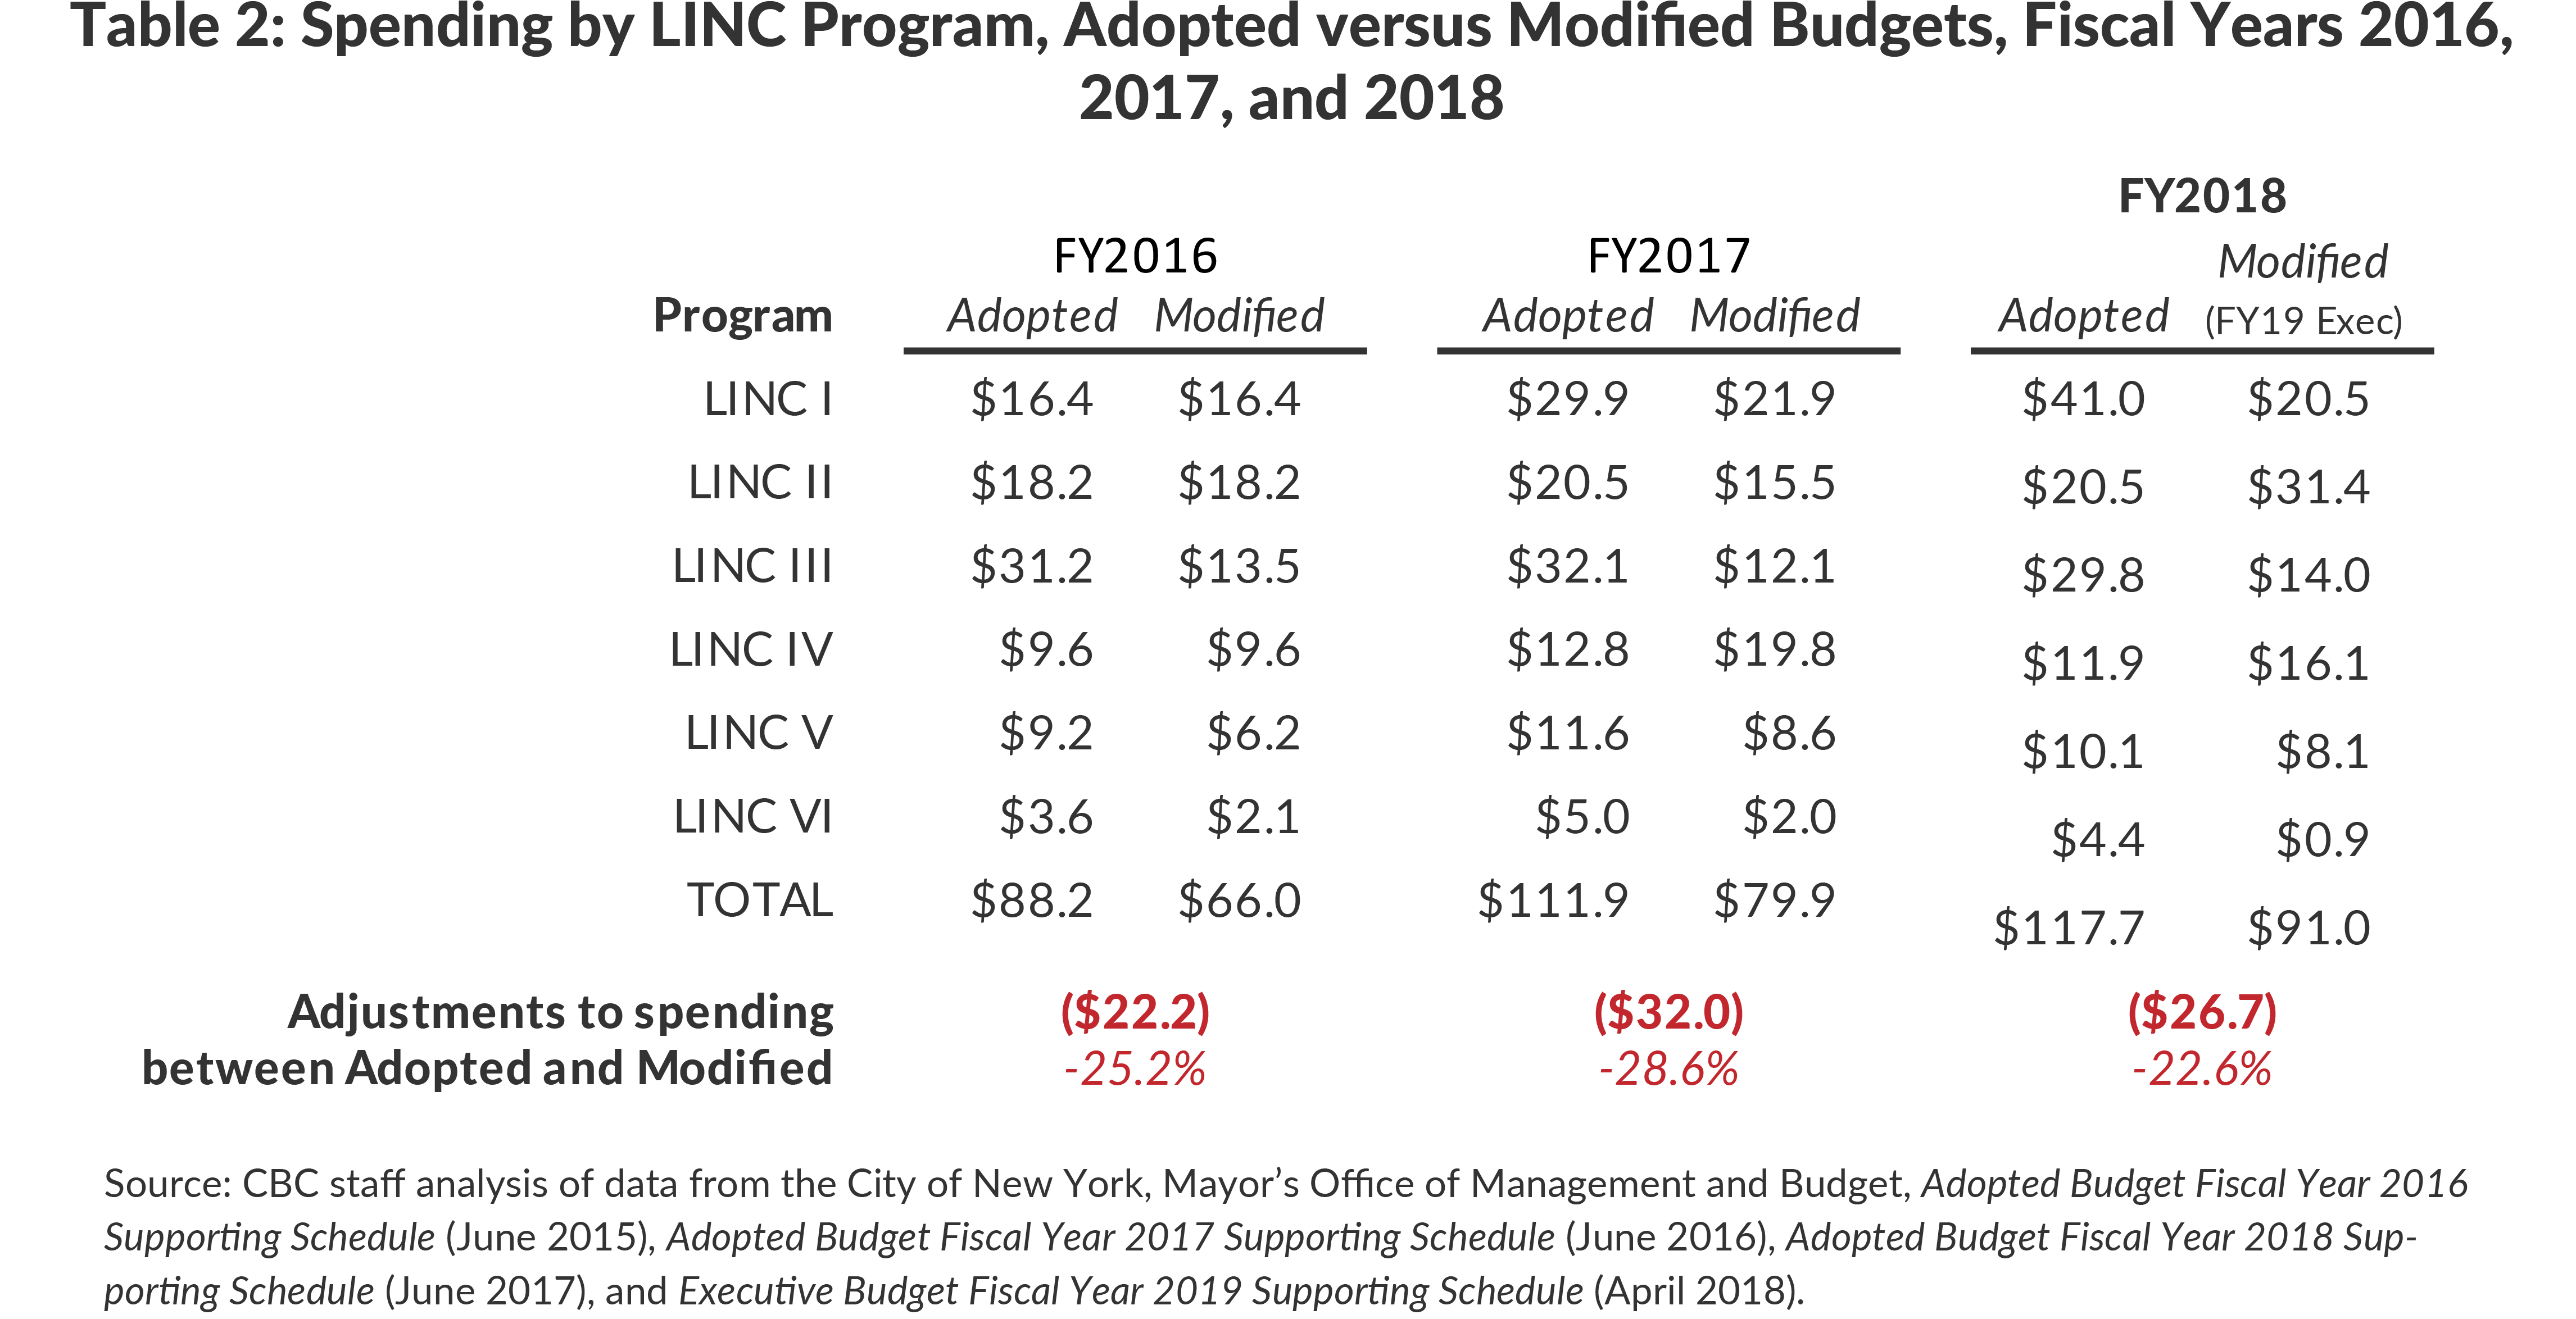 Table 2: Spending by LINC Program, Adopted versus Modified Budgets, Fiscal Years 2016,2017, and 2018